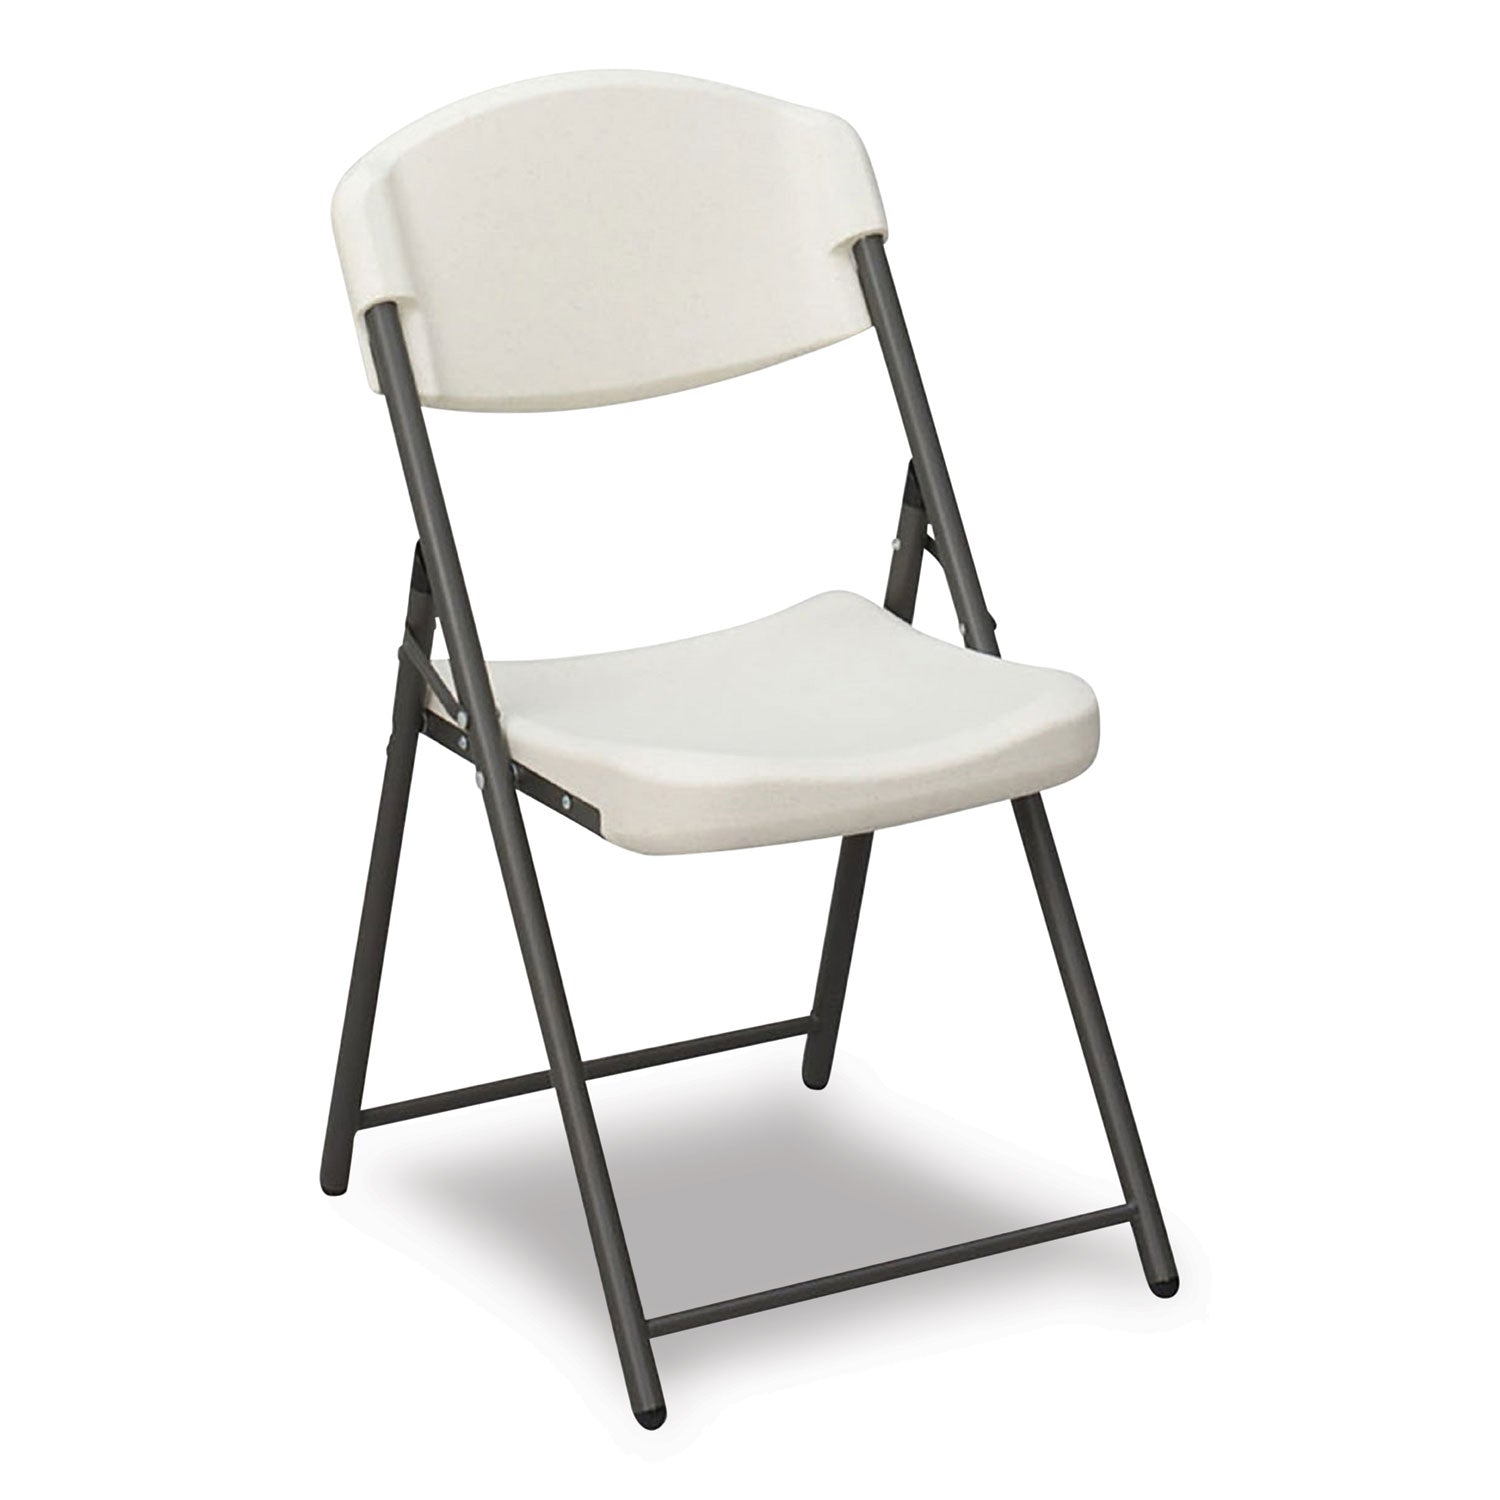 rough-n-ready-commercial-folding-chair-supports-up-to-350lb-18-seat-height-platinum-granite-seat-back-black-base-4-pack_ice64033 - 3